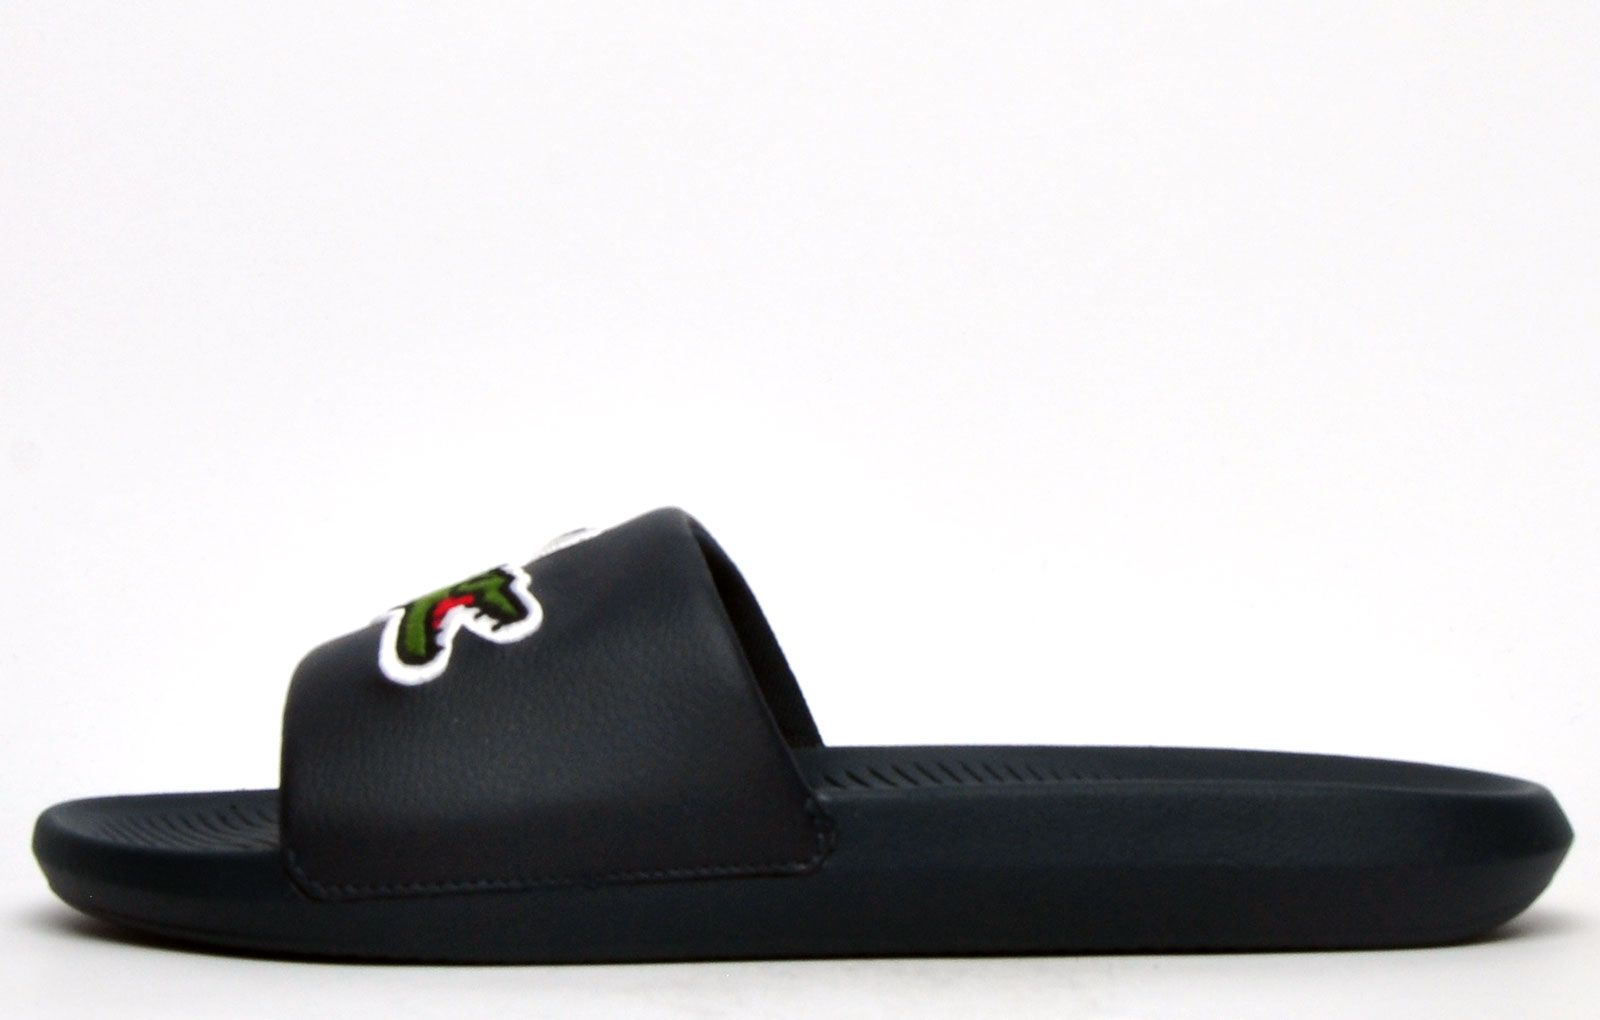 Step into eye catching summer style with these mens Croco Slides from Lacoste. In a bang on trend colourway, these designer sandals are delivered in a smooth synthetic upper with croc detailing across the forefoot foot strap. The comfy footbed moulds to your feet, delivering the perfect fit and feel while the grippy outsole will keep you sure and safe around the pool or in the shower. These designer slides are finished with eye catching Lacoste branding throughout just in case you want a sign of approval that youre wearing cool classic style this summer season 
 - Comfort moulded footbed
 - Single Strap Detail Over Foot
 - Grippy outsole
 - Slip on wear
 - Iconic Lacoste branding throughout
 Please Note: These Lacoste Sliders are sold as B grades which means they have some slight cosmetic issues on the shoe and they come poly bagged. All shoes are guaranteed against fair wear and tear and offer a substantial saving against the normal high street price. The overall function or performance of the shoe will not be affected by cosmetic issues. B Grades are original authentic products released by the brand manufacturer with their approval at greatly reduced prices. If you are unhappy with your purchase we will be more than happy to take the shoes back from you and issue a full refund.